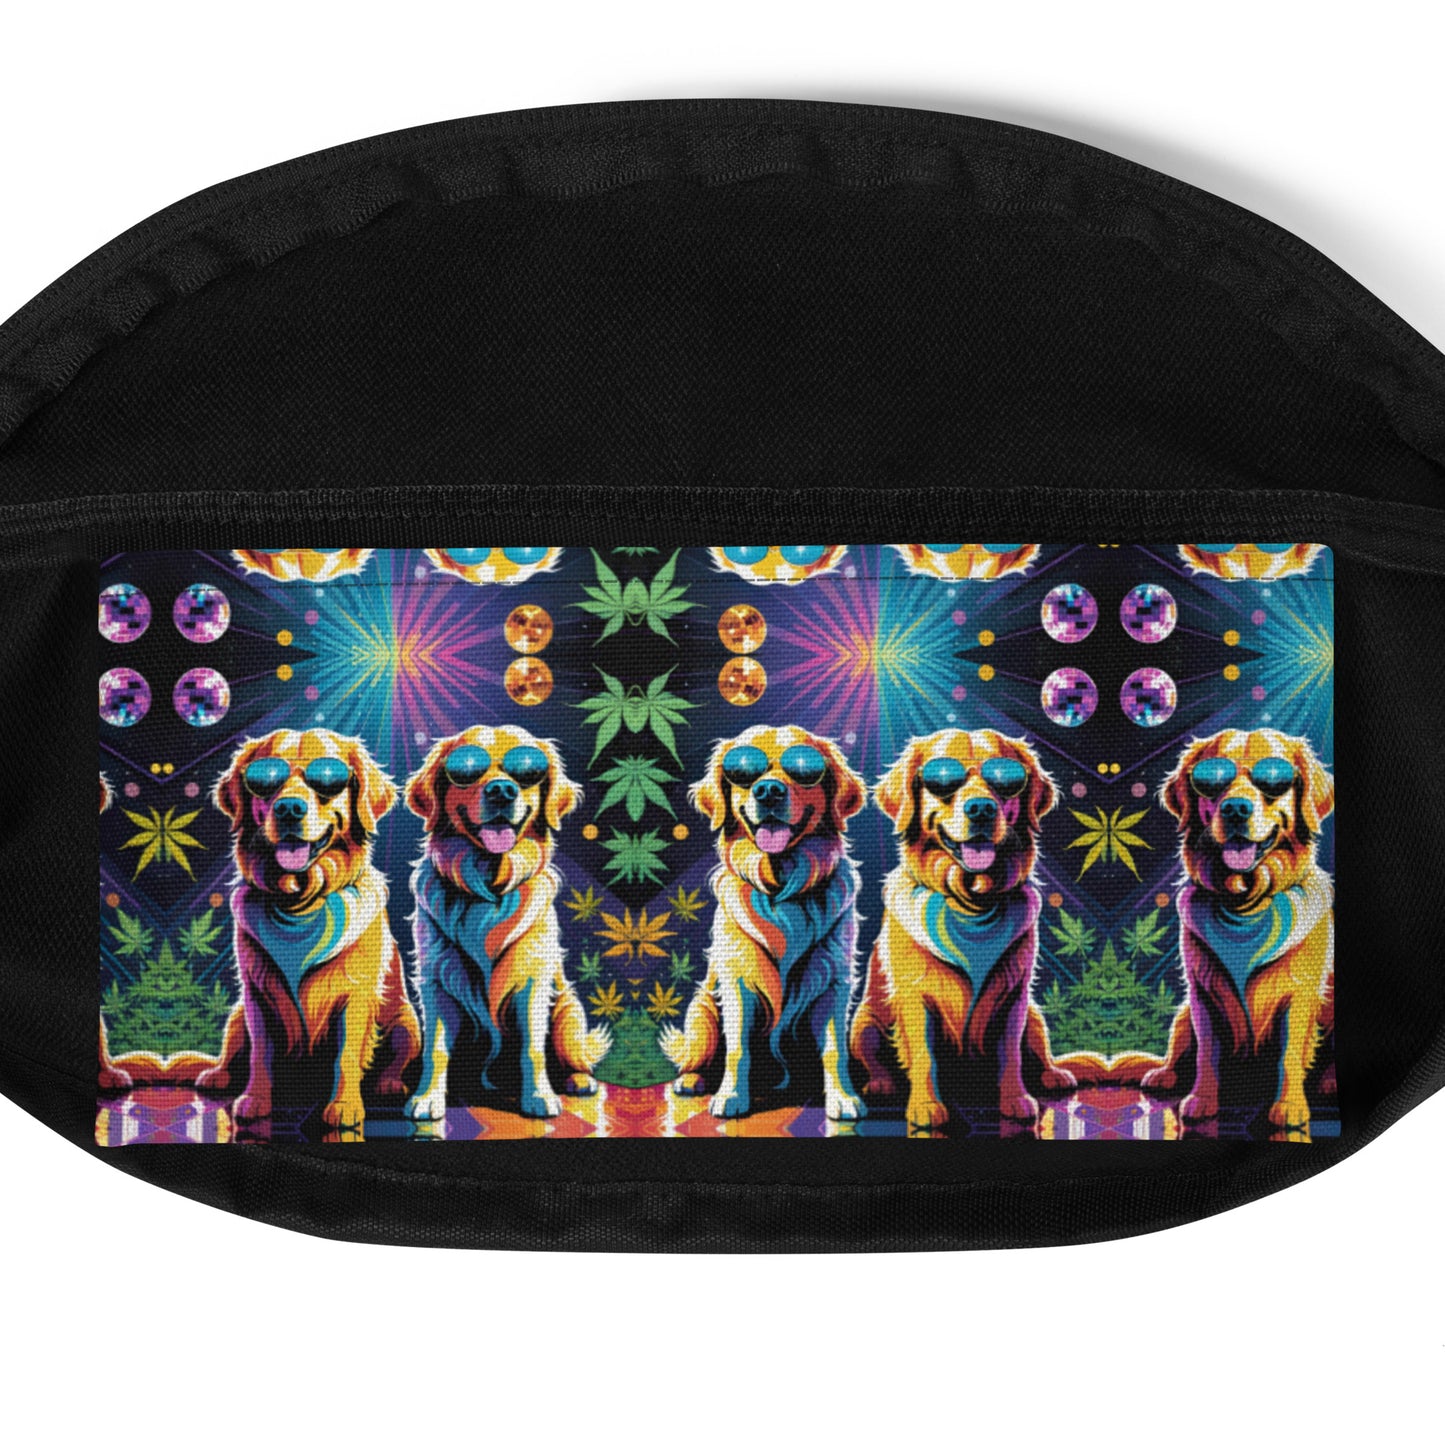 Disco Cats and Dogs Fanny Pack